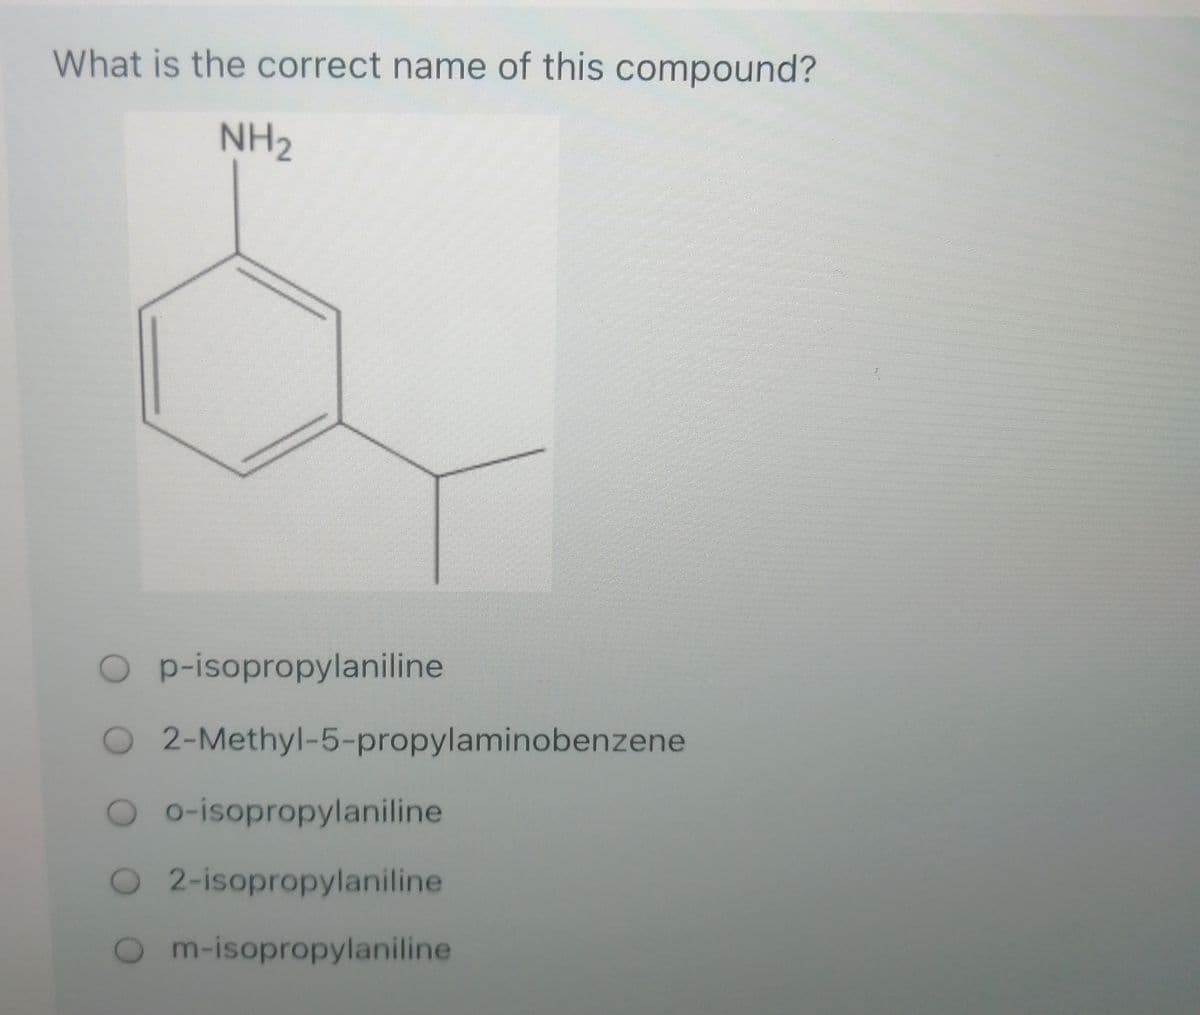 What is the correct name of this compound?
NH2
O p-isopropylaniline
O 2-Methyl-5-propylaminobenzene
O o-isopropylaniline
O2-isopropylaniline
m-isopropylaniline
